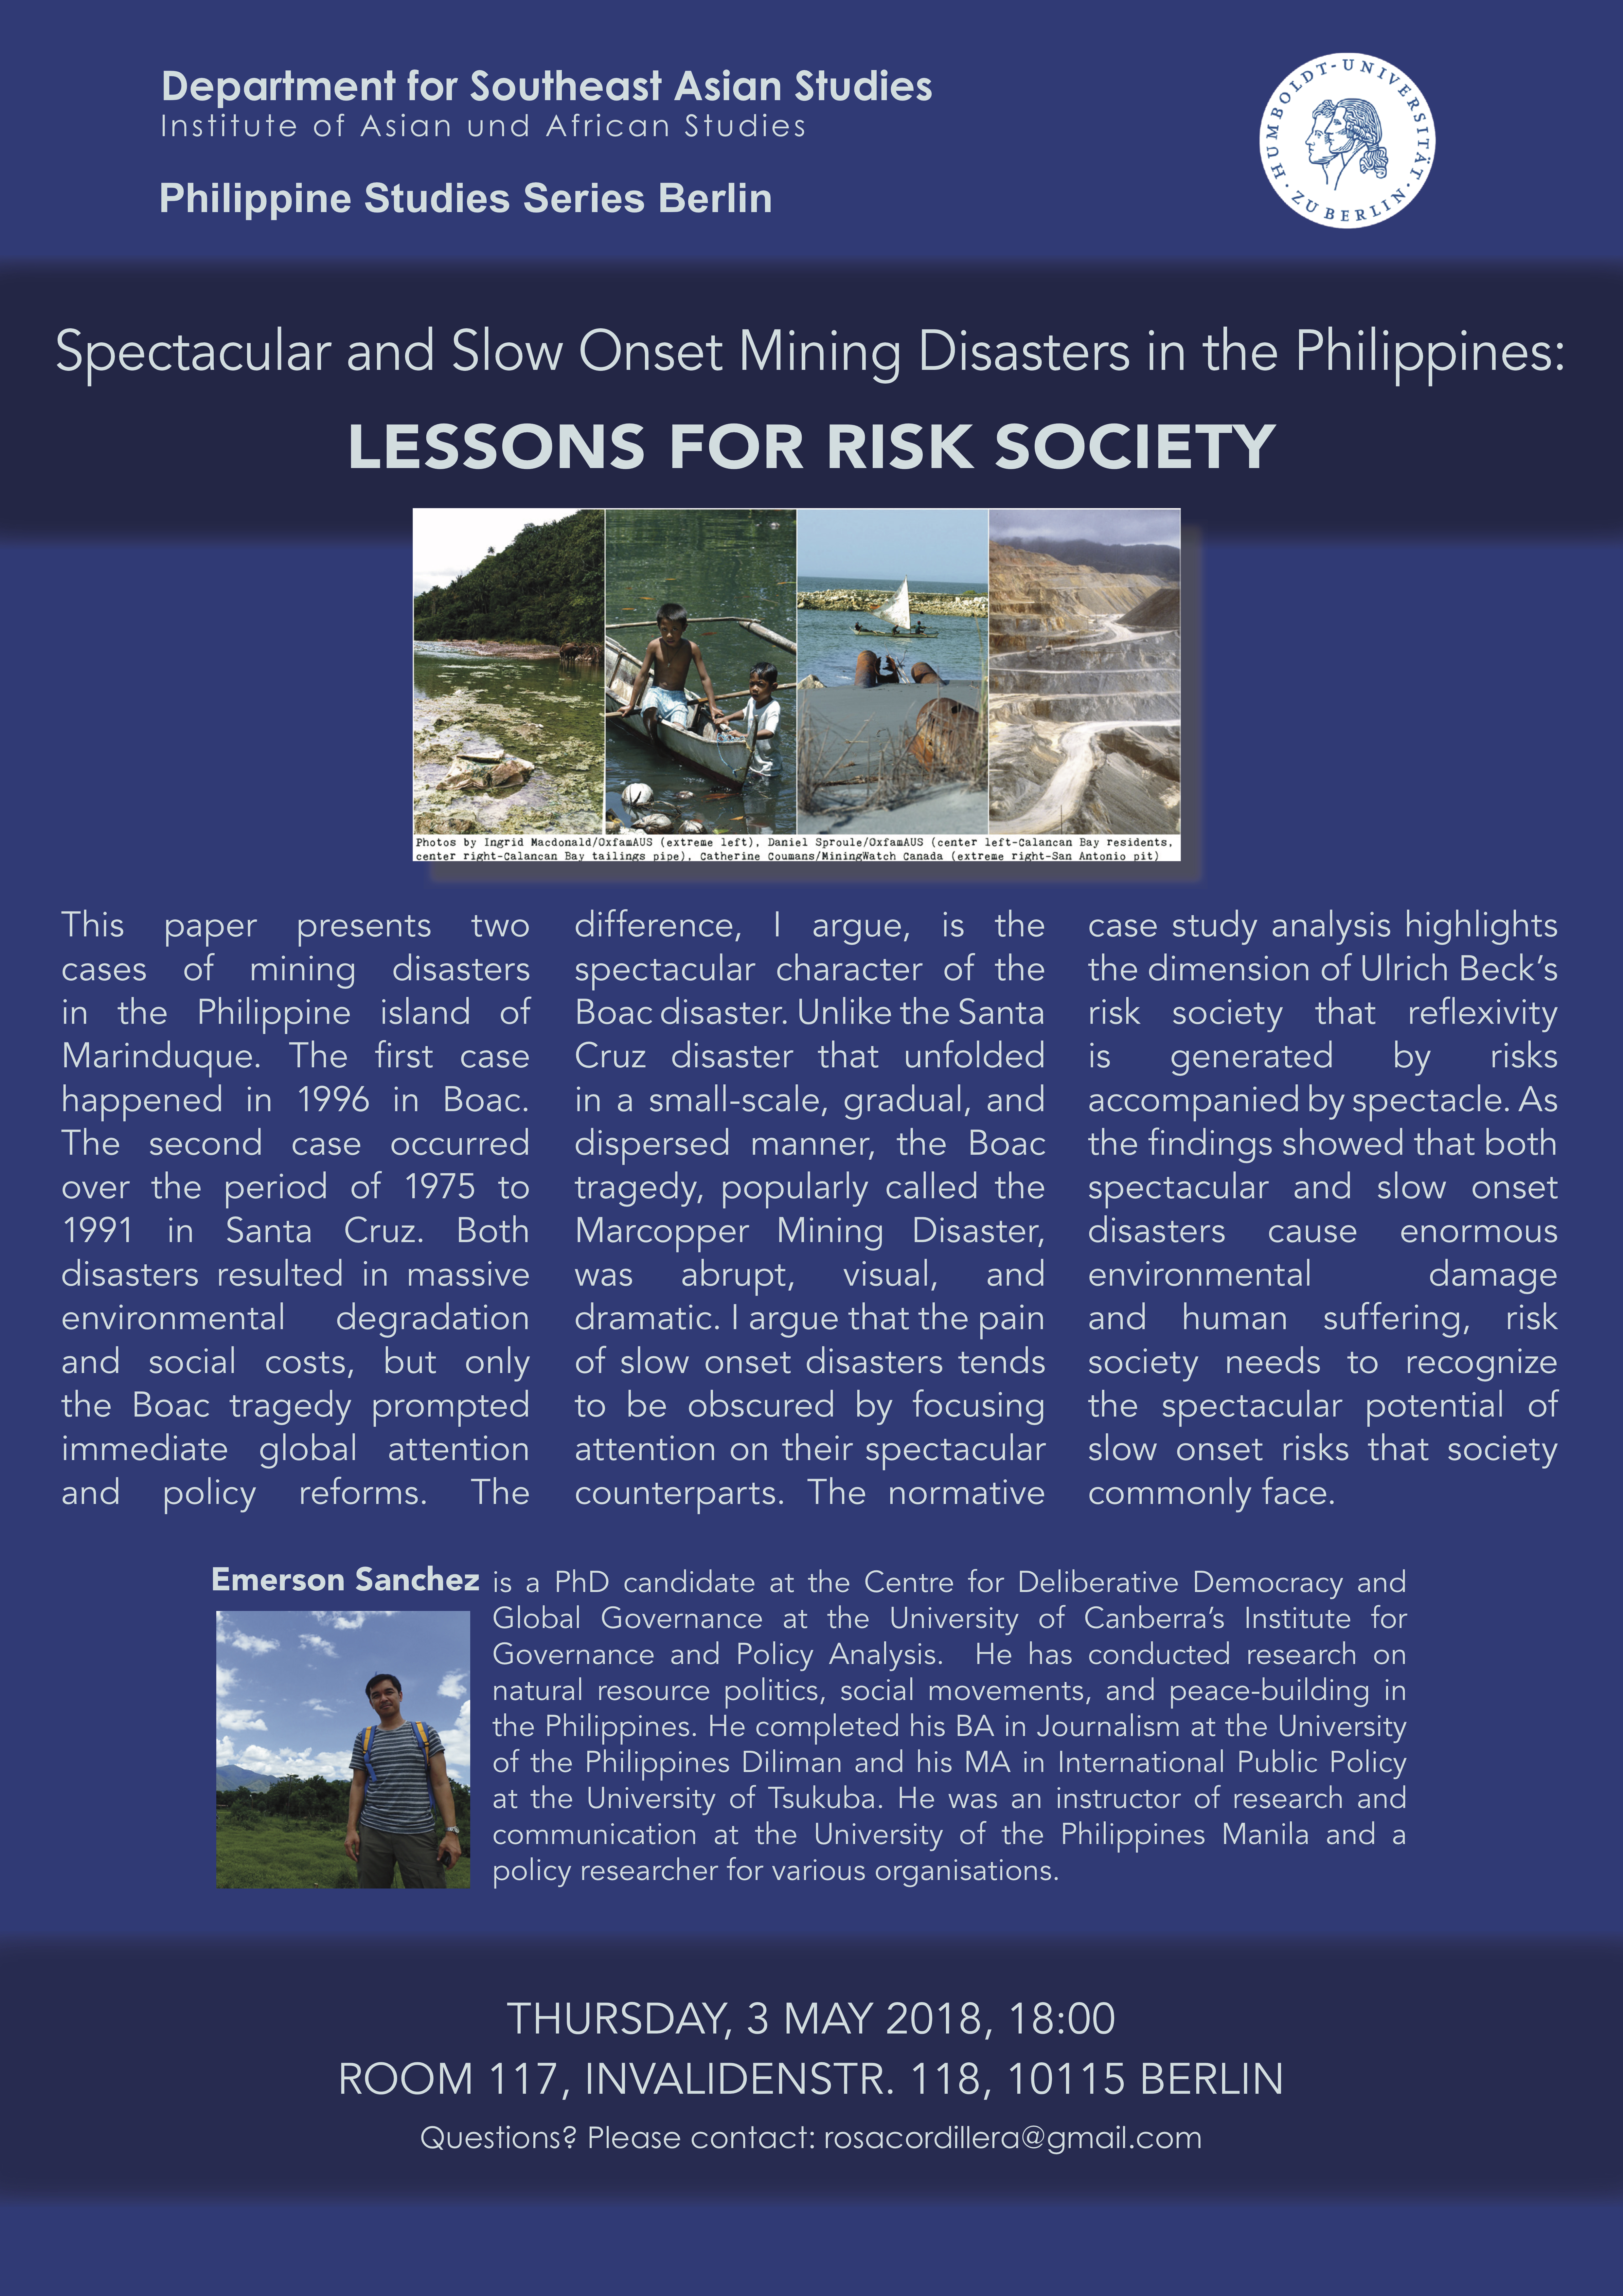 Lecture: "Spectacular and Slow Onset Mining Disasters in the Philippines: Lessons for Risk Society"